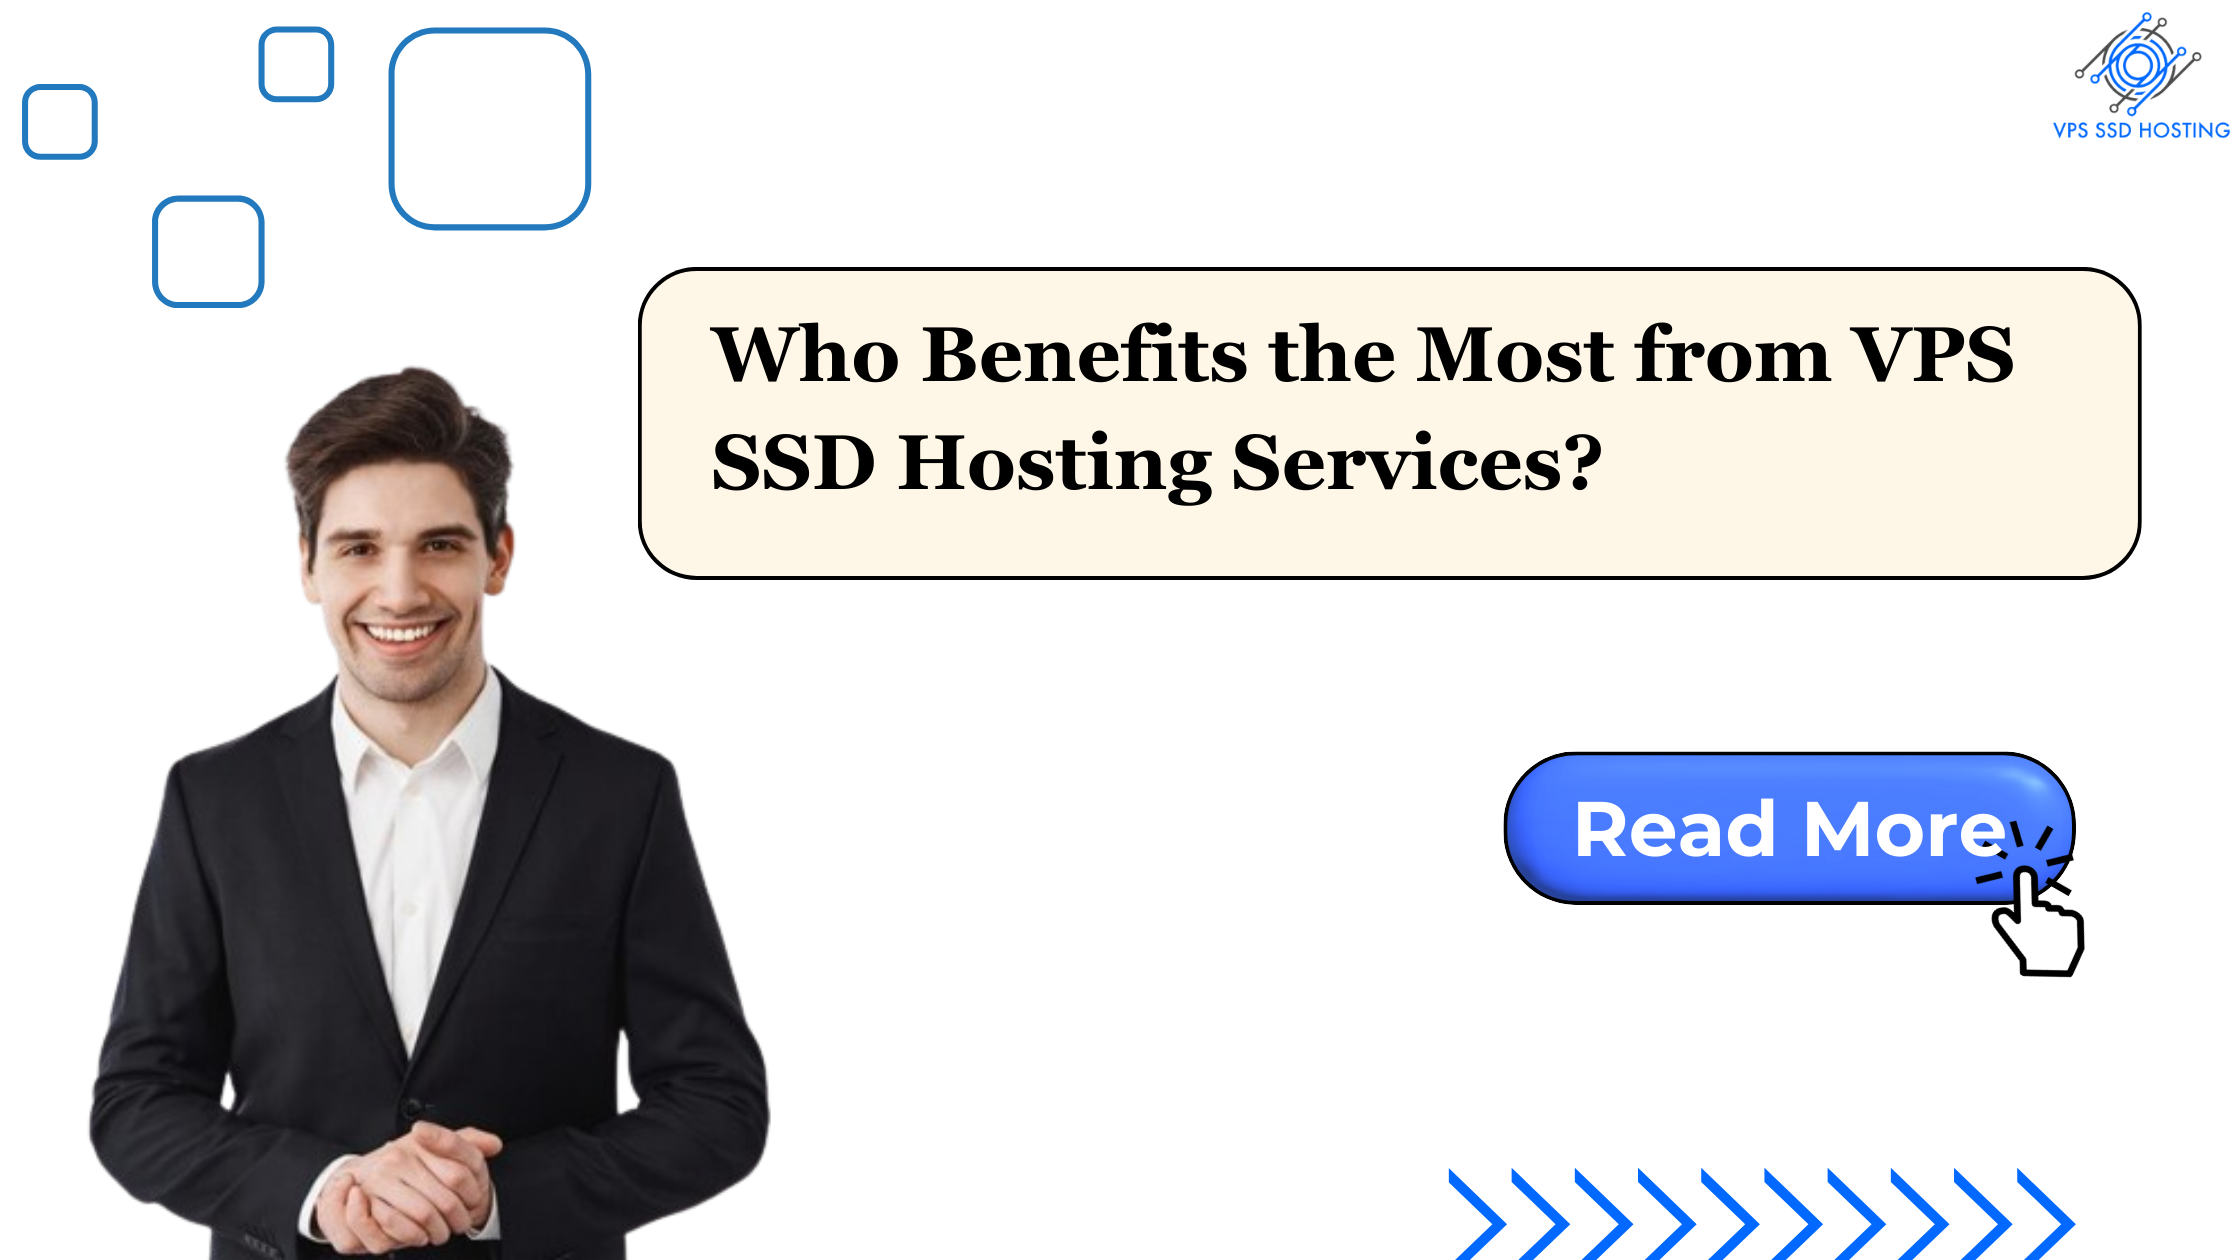 Who Benefits the Most from VPS SSD Hosting Services?